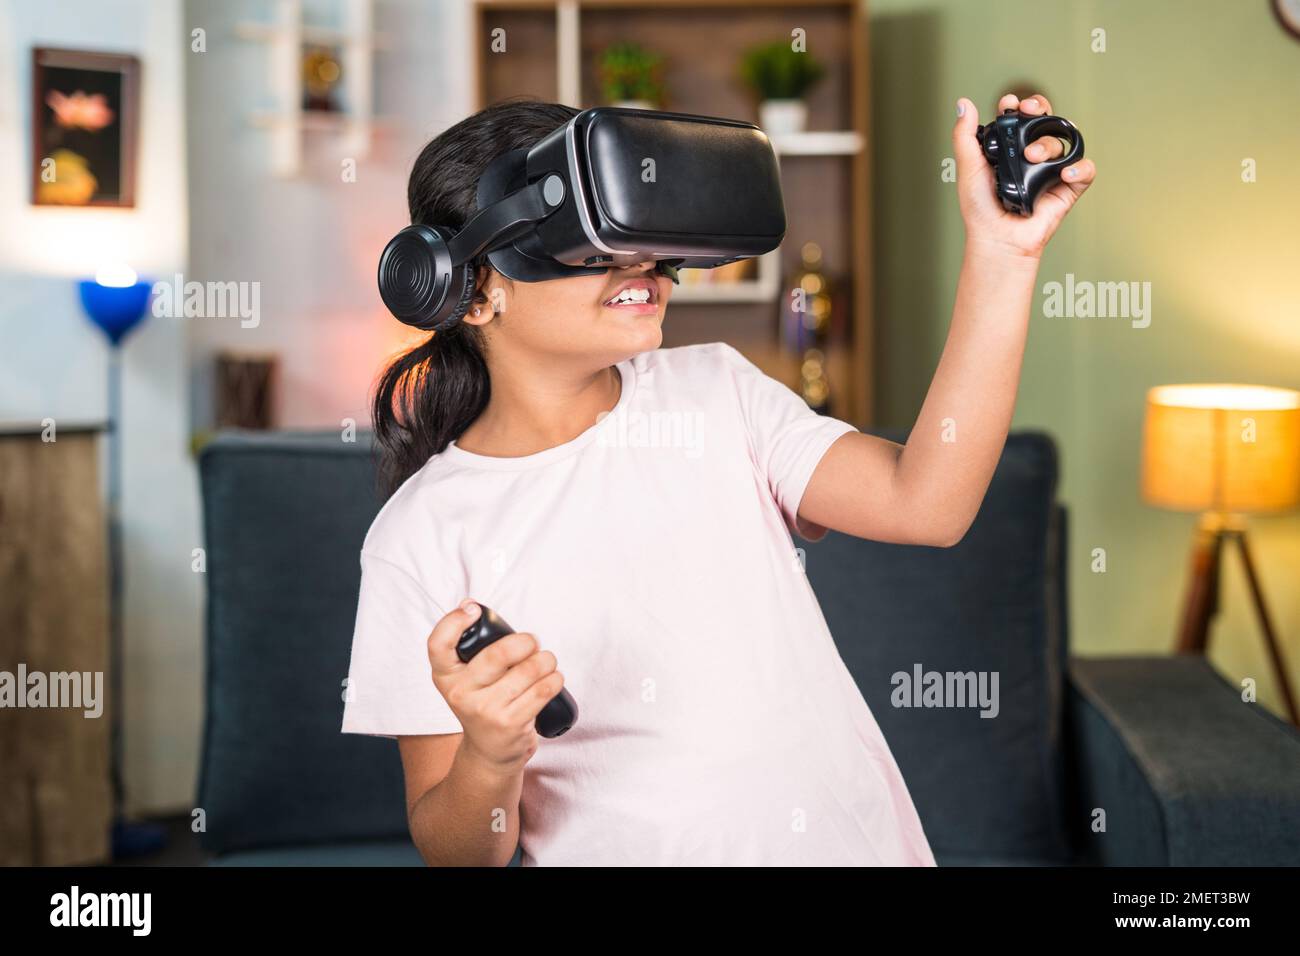 Girl child with VR or vertual reality goggles and joystick in hands playing video game on metaverse at home - concept of immersive experience Stock Photo